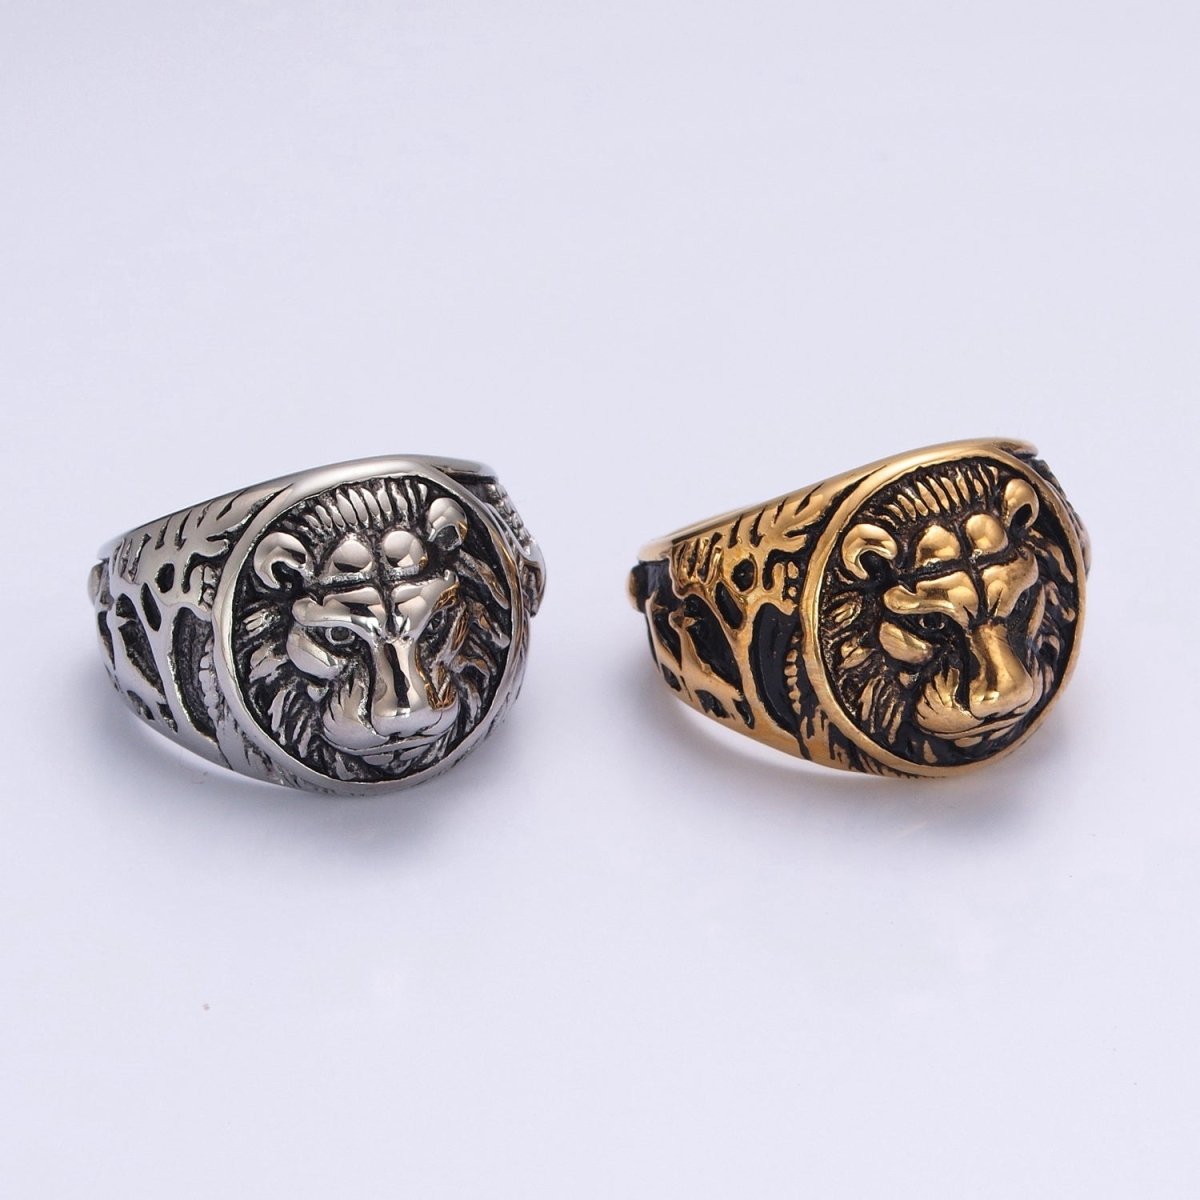 Men's Vintage Stainless Steel Ring Lion Head Shield Biker Gold / Silver Band Men Jewelry S-049 S-050 S-051 S-052 - DLUXCA